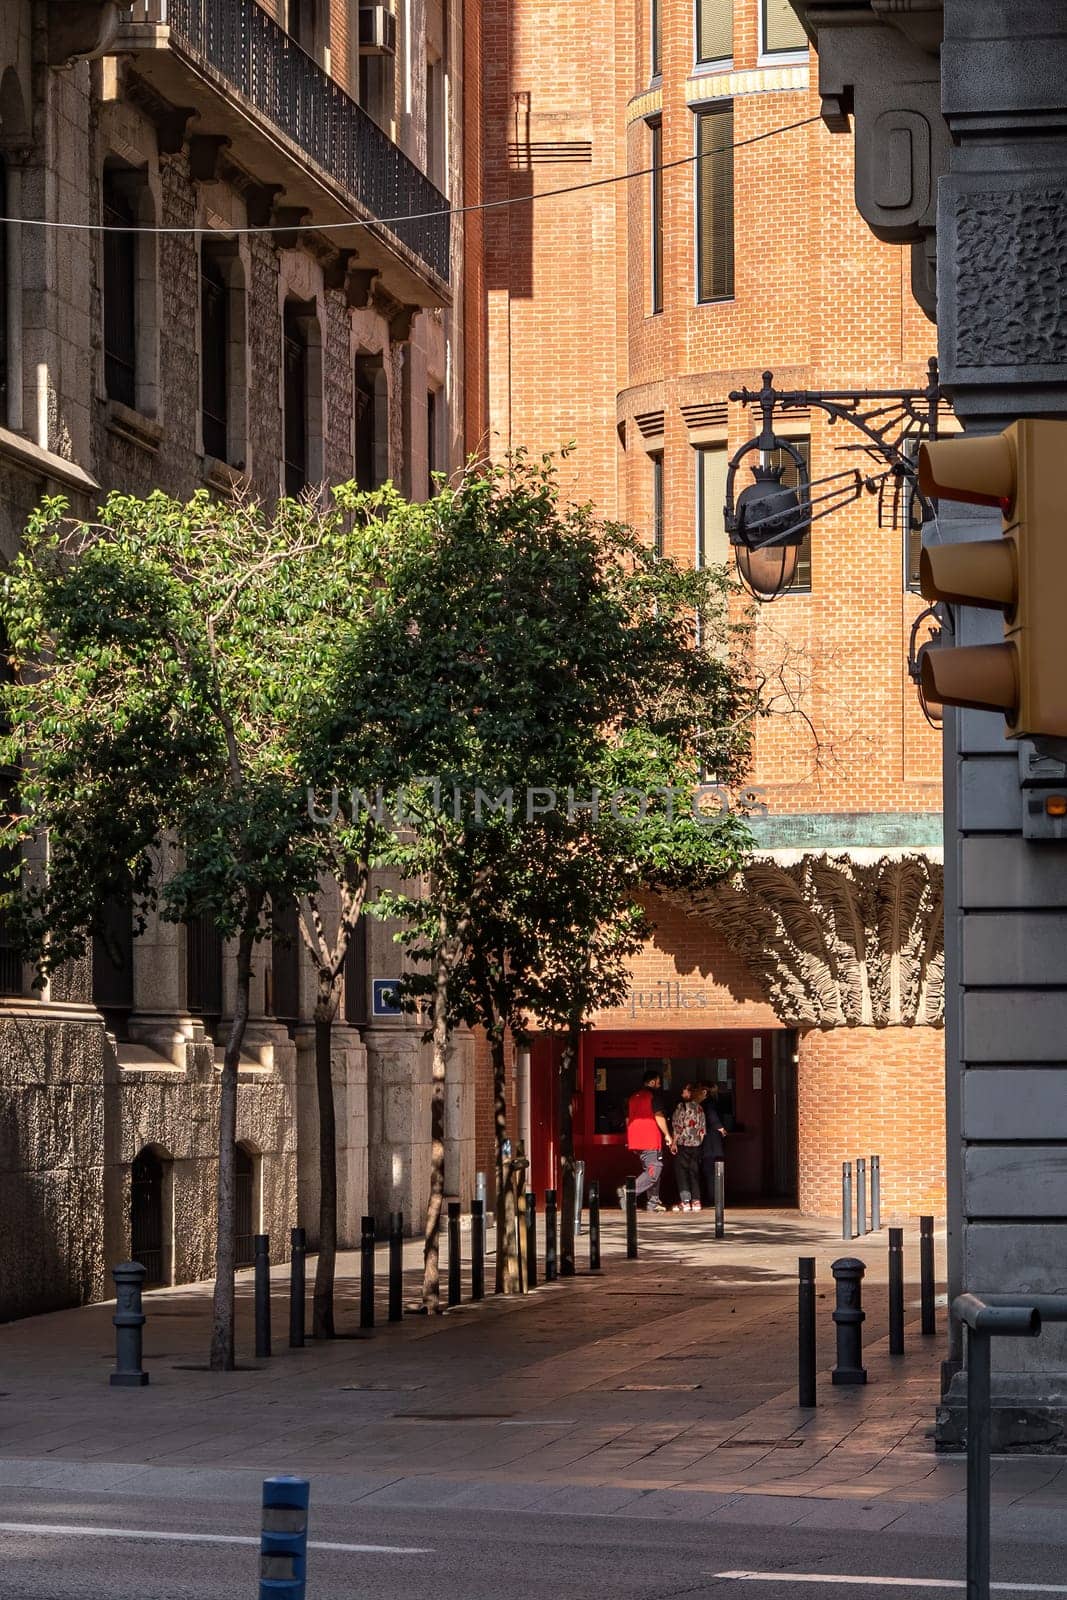 Streets of Barcelona. A view from Via Laietana to a street with buildings, trees and box office. by apavlin